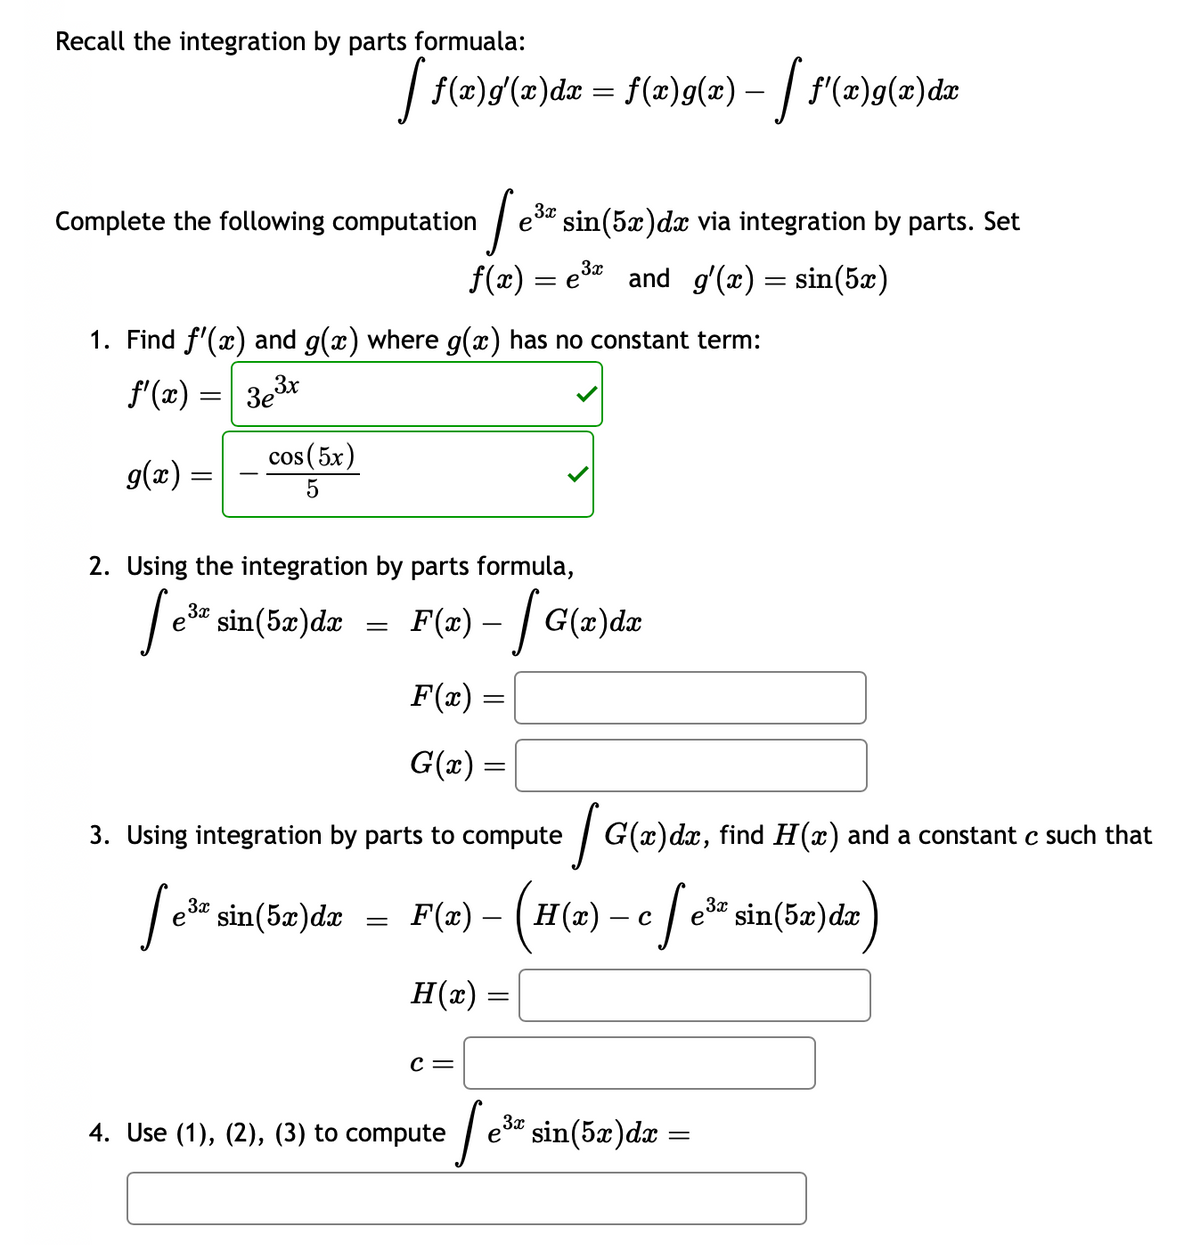 Recall the integration by parts formuala:
Complete the following computation
g(x)
=
1. Find f'(x) and g(x) where g(x) has no constant term:
f'(x) = 3eº 3x
cos (5x)
5
[ f(x)g'(x)dx = f(x)9(x) — [ f'(x)g(x) dx
3x
[e³= sin(5x)dr
=
2. Using the integration by parts formula,
3x
1 e³* sin(5x) dx via integration by parts. Set
=
3x
ƒ(x) = e³ and g'(x) = sin(5x)
F(x) - | G(x)da
-
F(x) =
G(x) =
3. Using integration by parts to compute
[e³* sin(5x)da
C =
4. Use (1), (2), (3) to compute
F(@) - (H(a) - c / e*sin(5a)da
с e³
dx
H(x)
[G(a)da, find H(a) and a constant c such that
=
| e³ª sin(5x)dx =